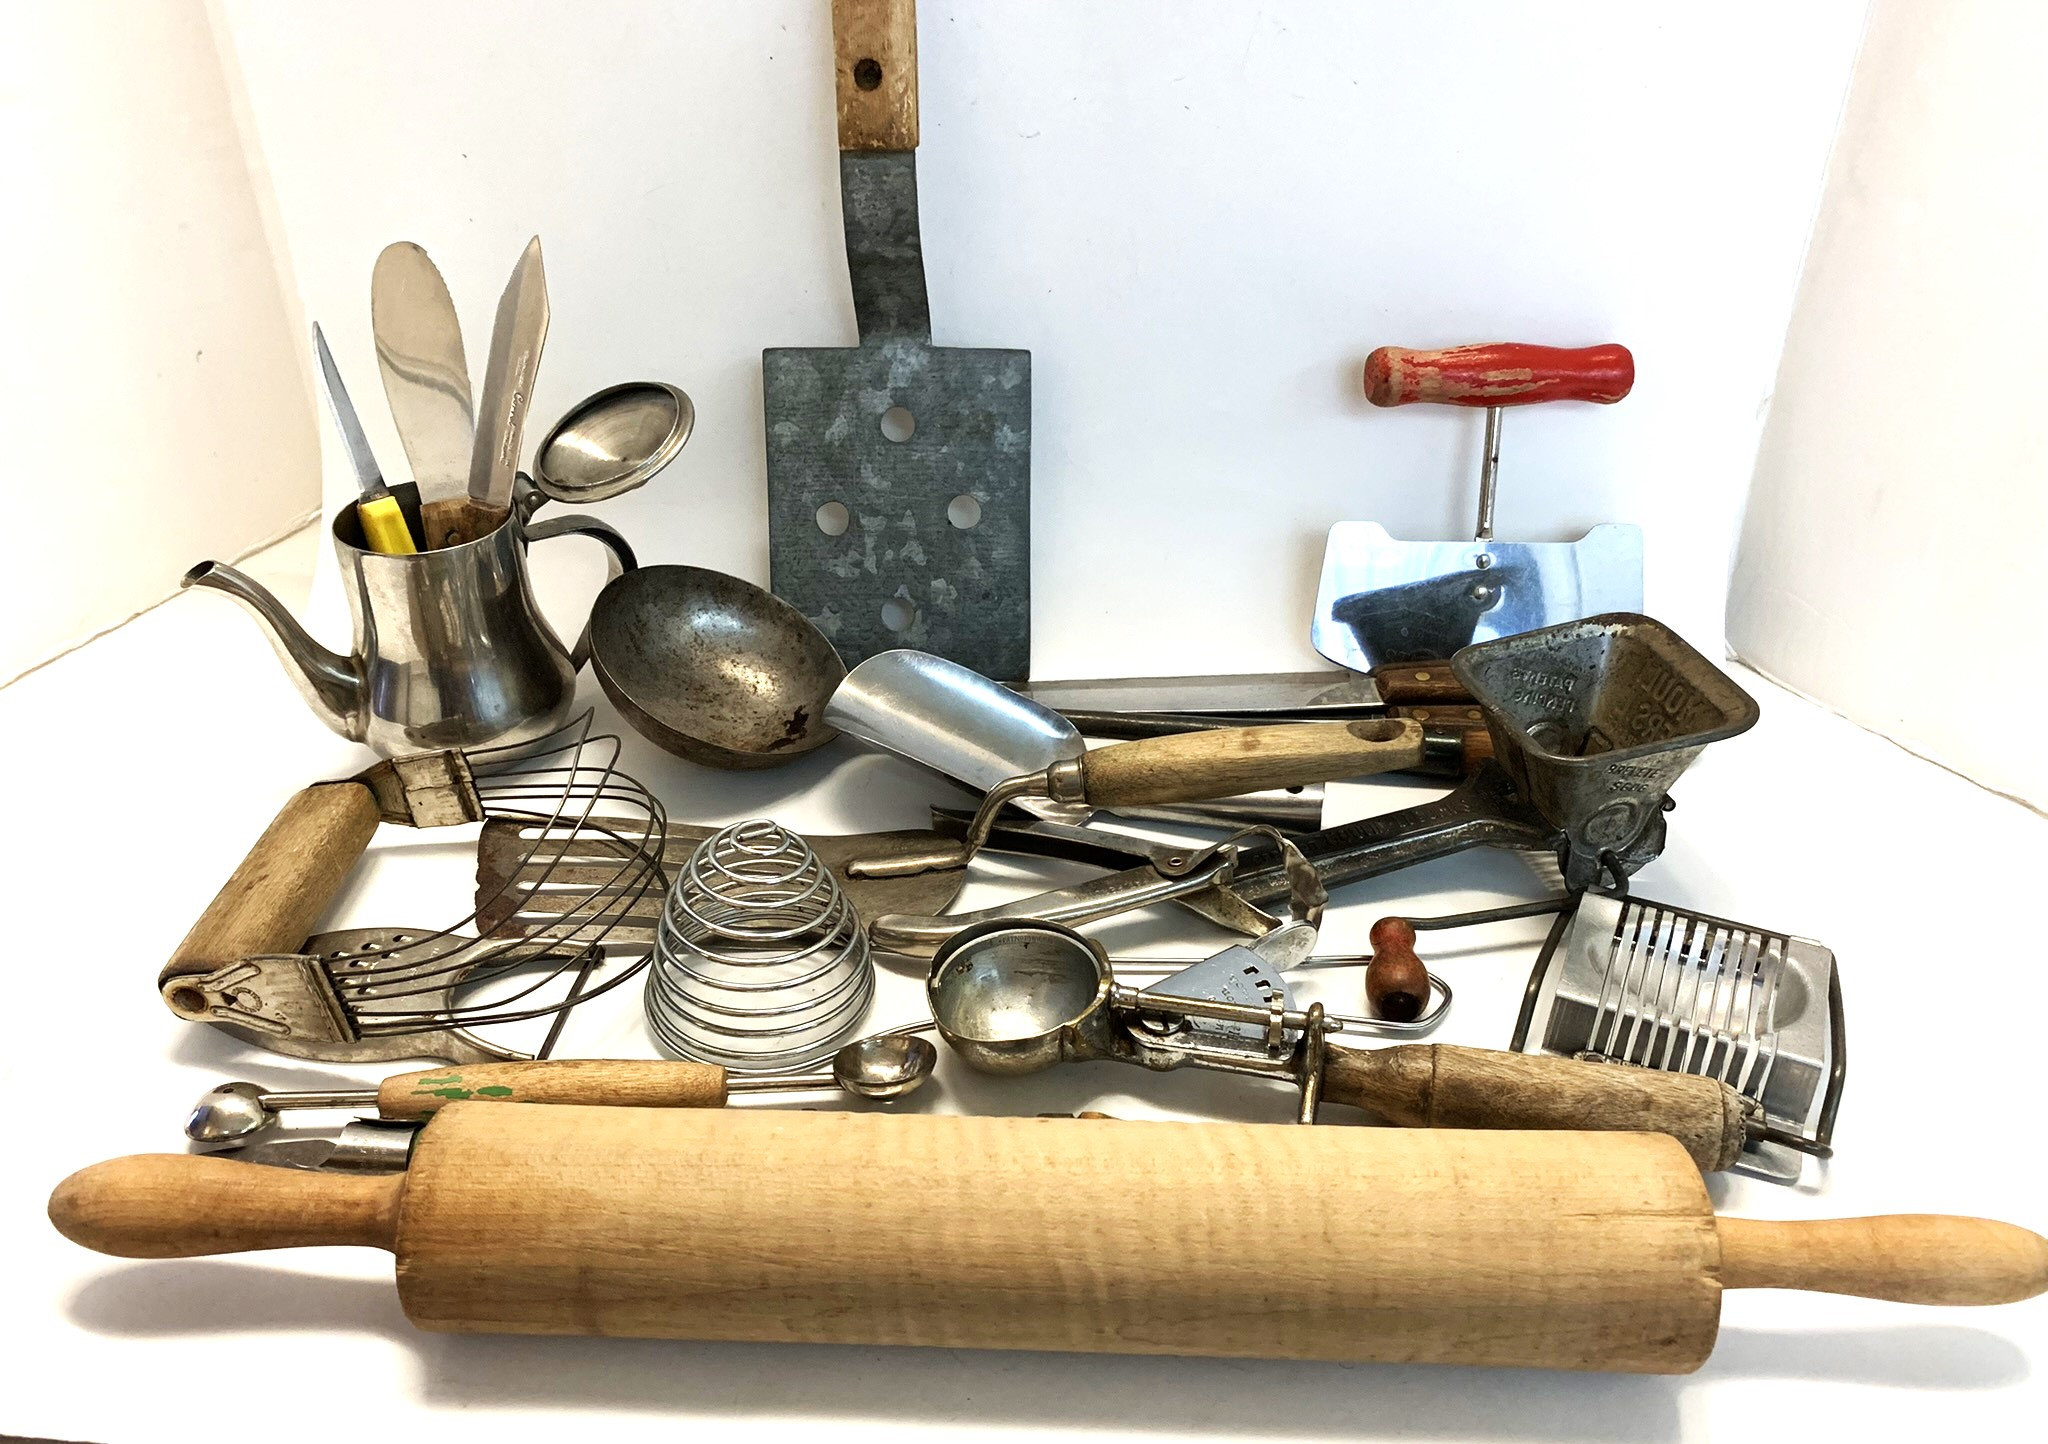 Lot of 20 Cooking Utensils and Kitchen Gadgets, USED, Vintage and  Non-vintage